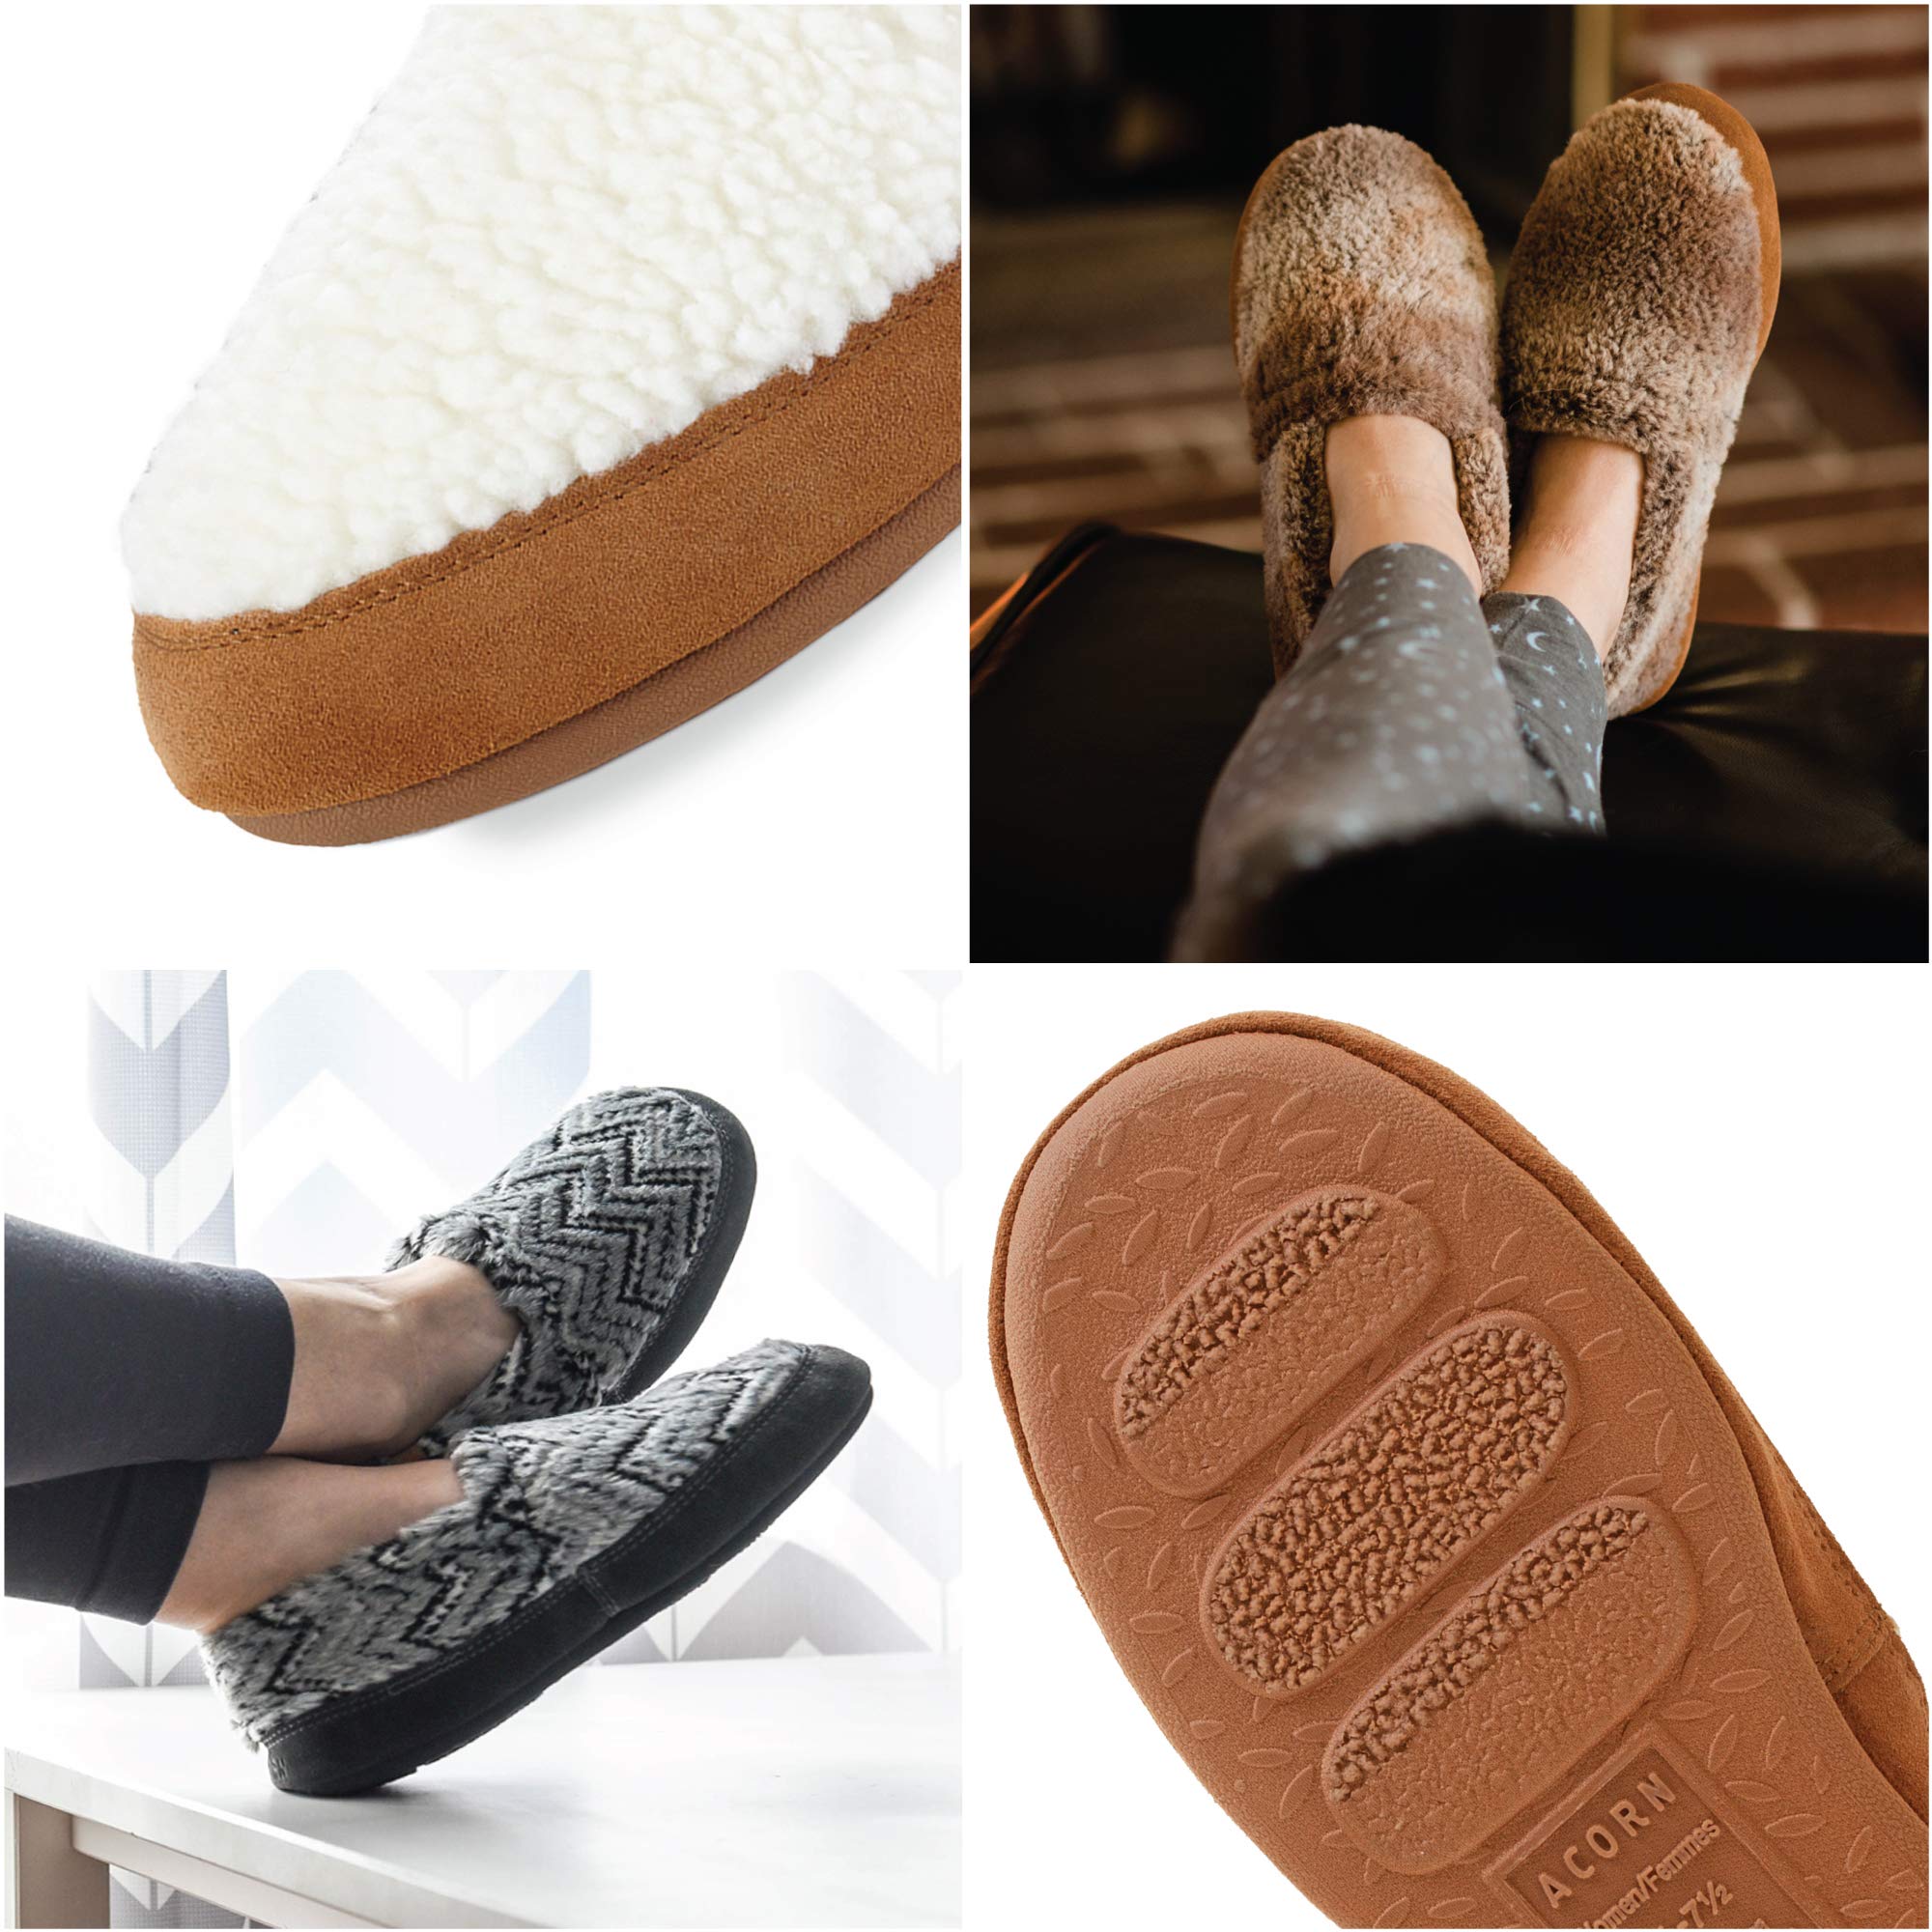 Acorn Women's Moc Slipper - Cozy Memory Foam Moccasins for Women, Cute House Shoes with Cloud Like Support and Indoor / Outdoor Sole